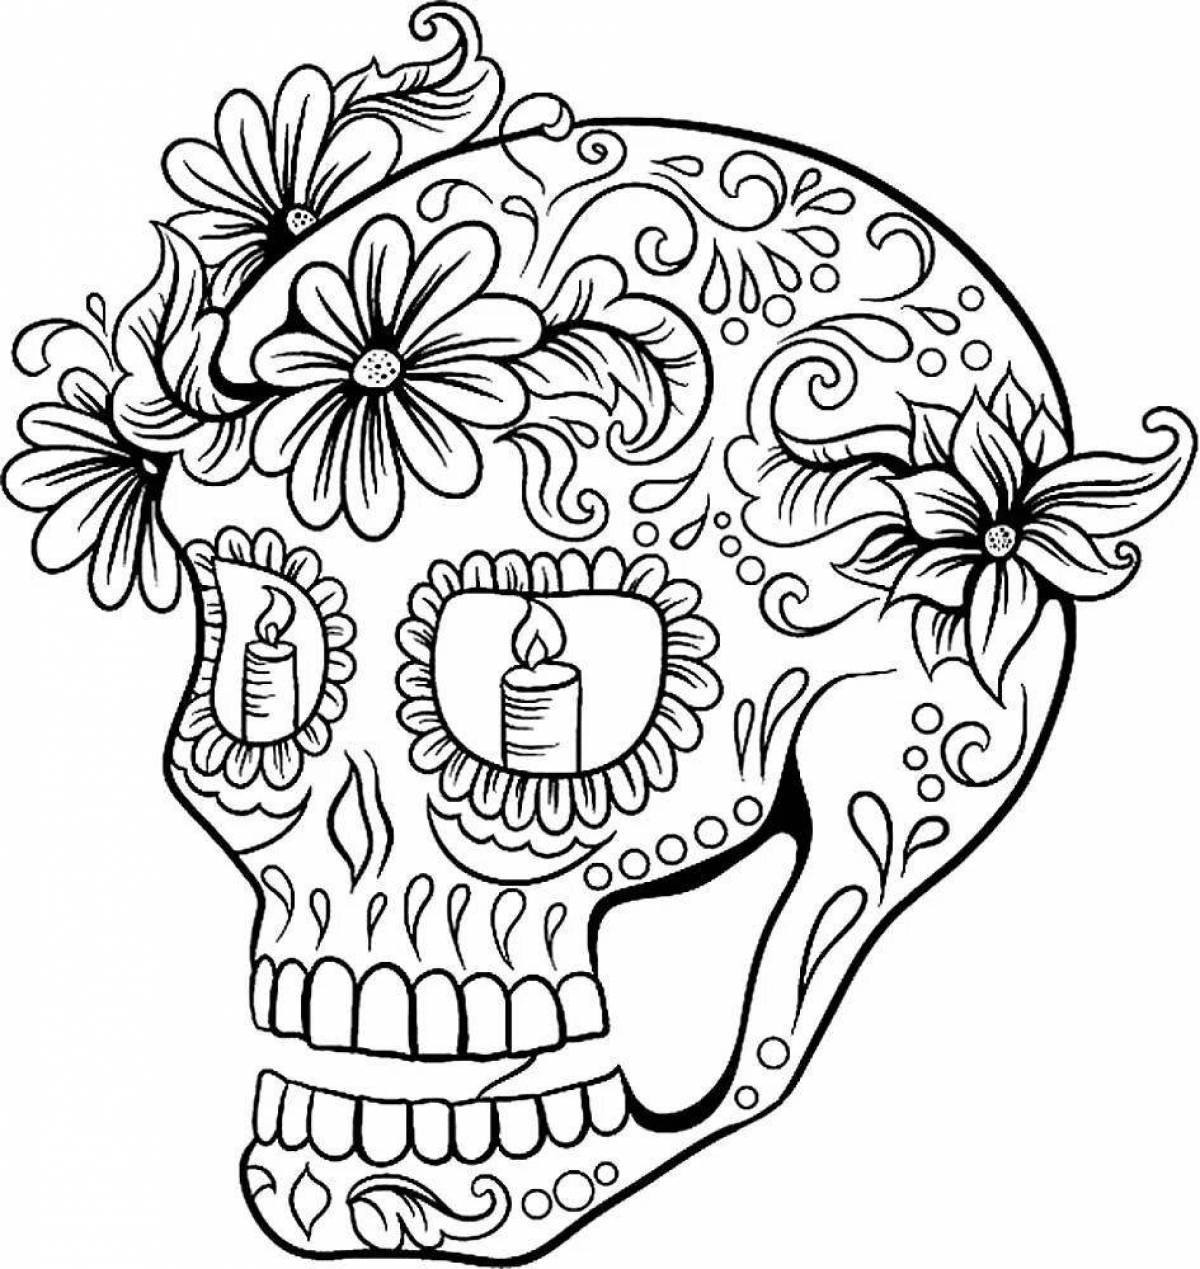 Exquisite antistress coloring book